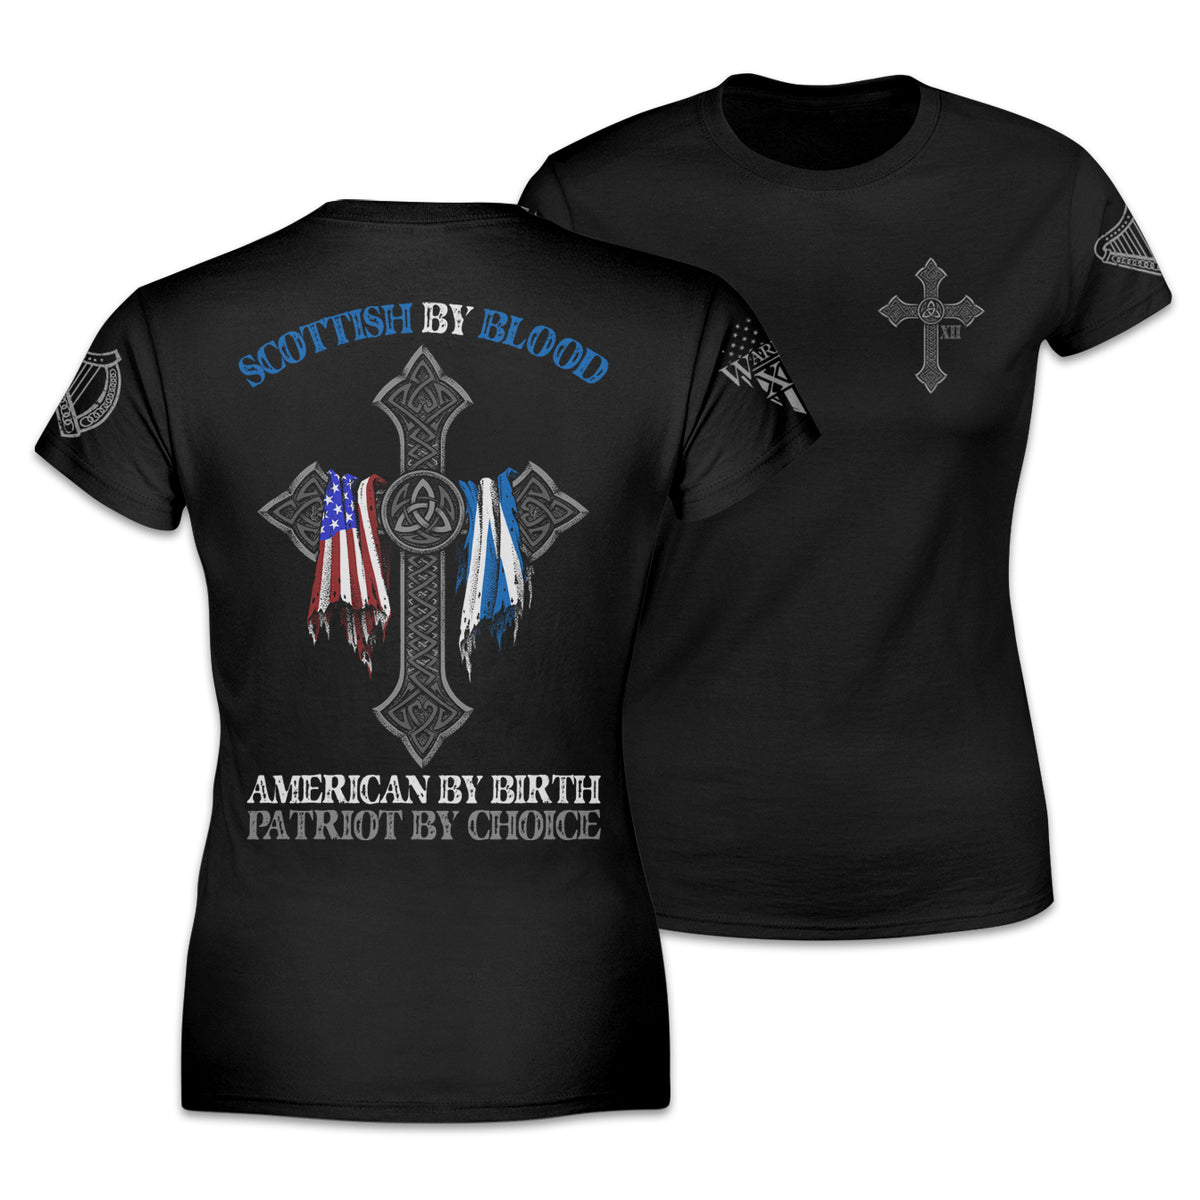 Front and back black women's relaxed fit shirt with the words "Scottish by blood, American by birth, patriot by choice" with a cross holding the American and Scottish flag printed on the shirt.